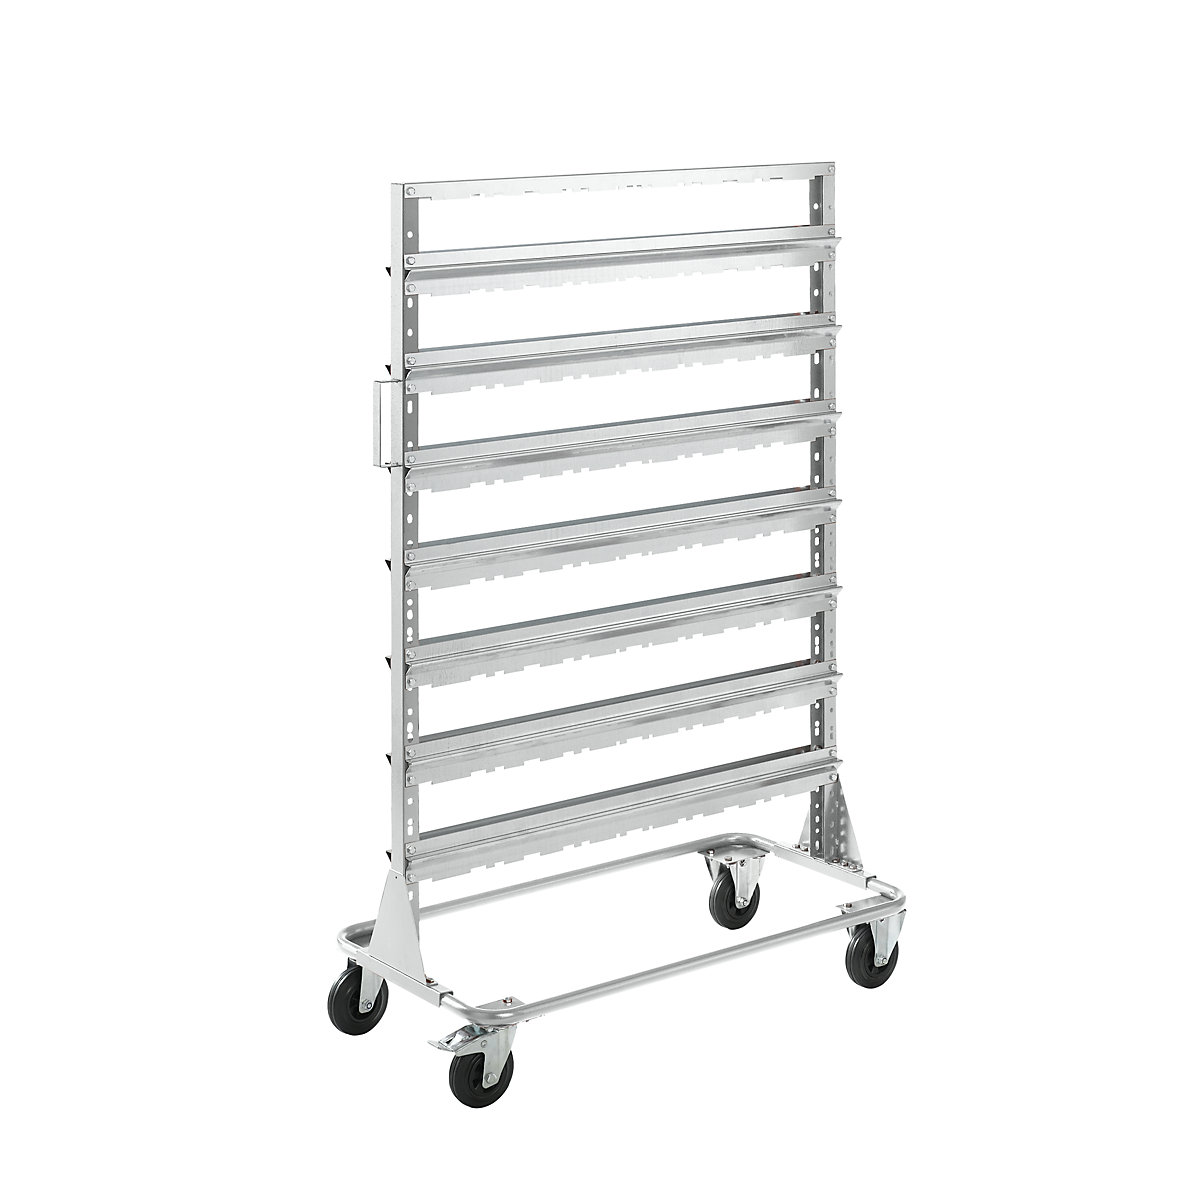 Mobile rack, height 1588 mm, mobile rack for 84 open fronted storage bins, light grey-3